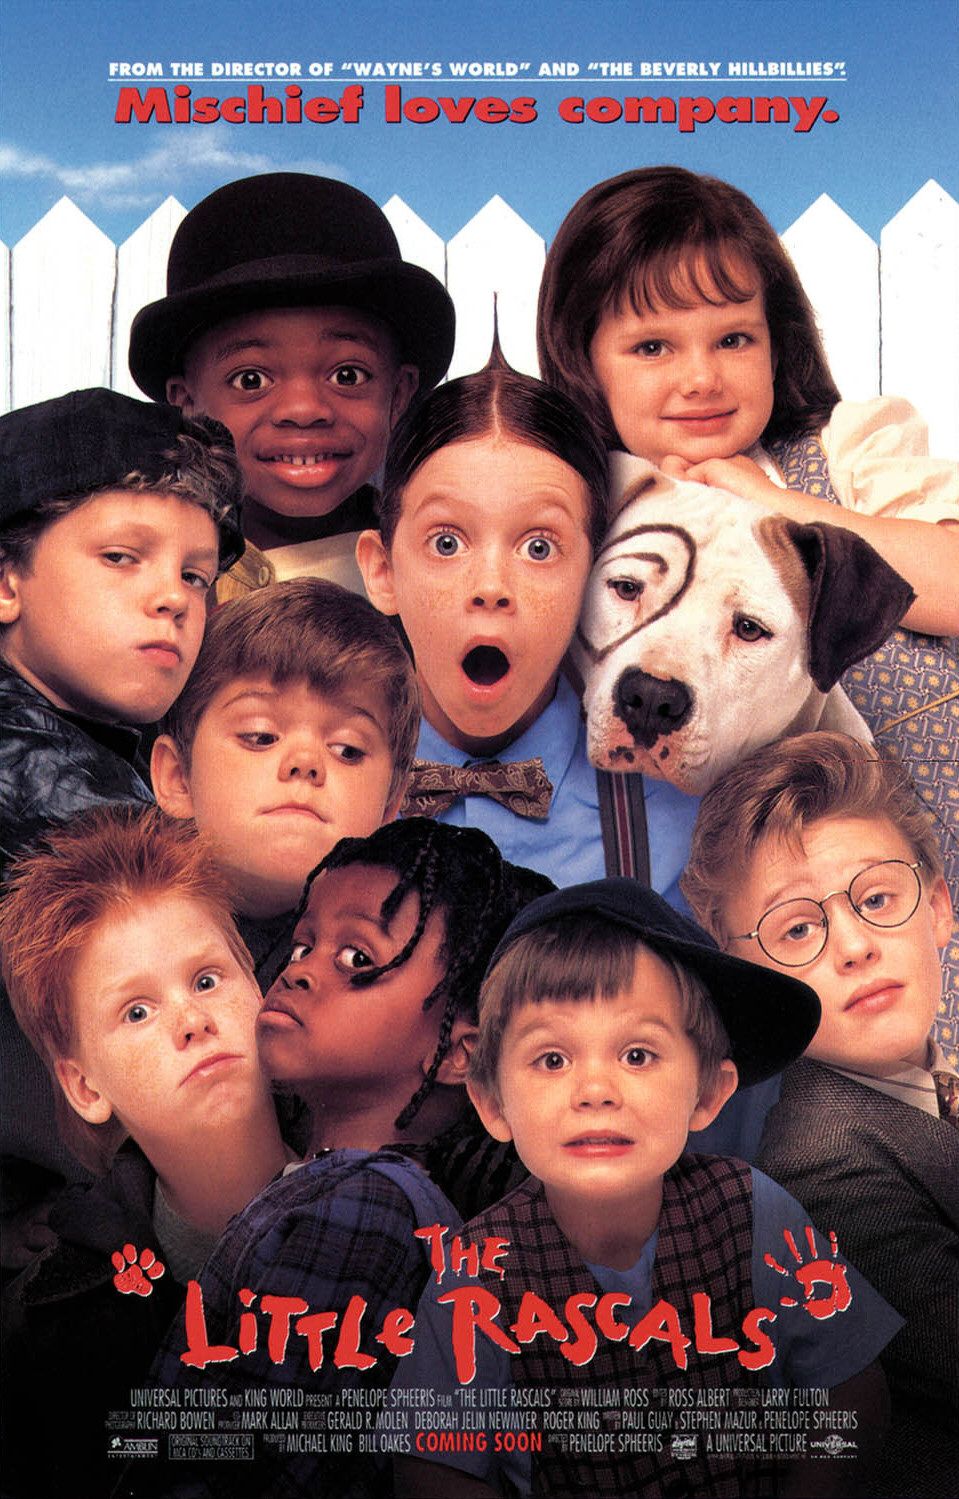 The Little Rascals' 20th Anniversary Photo Shoot